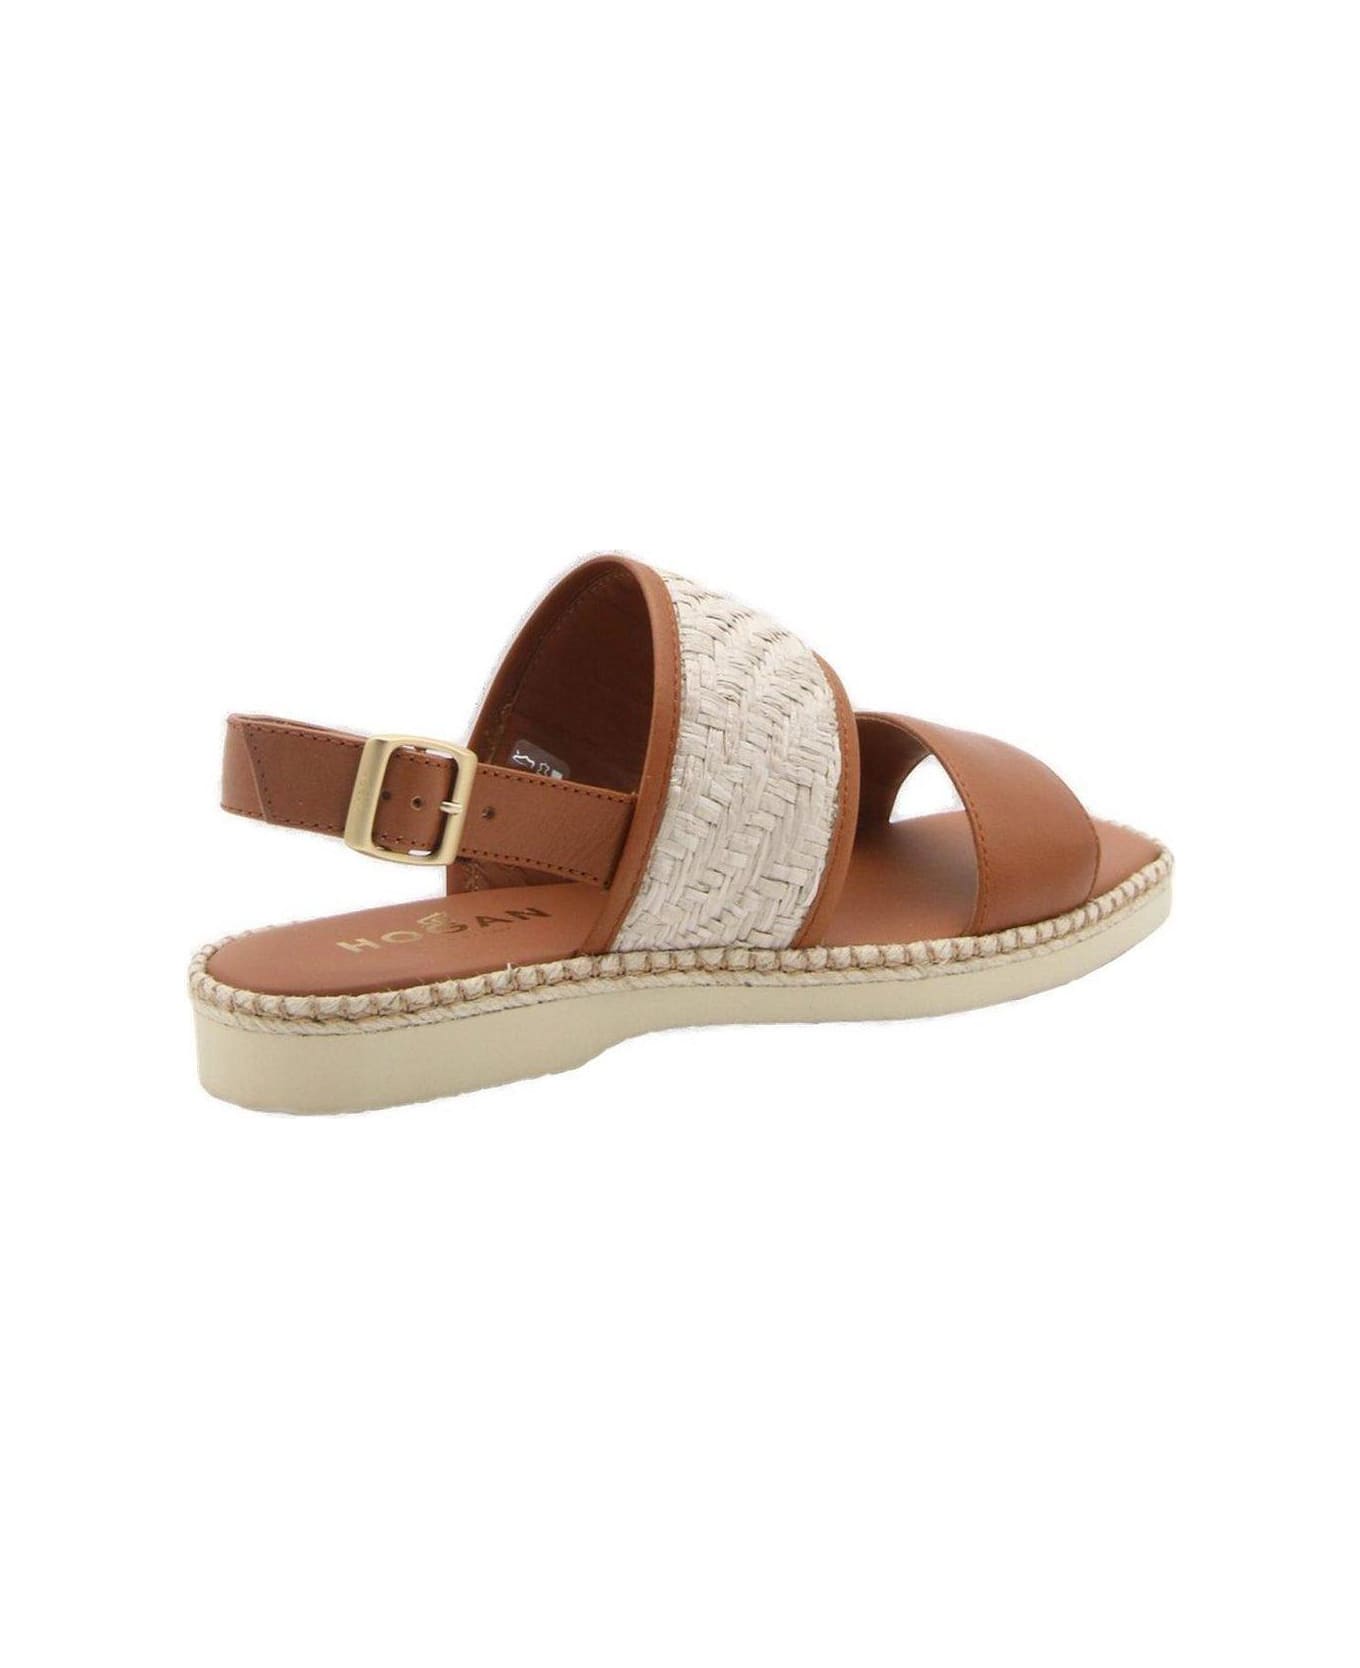 Hogan H660 Double-strap Woven Sandals - Leather サンダル